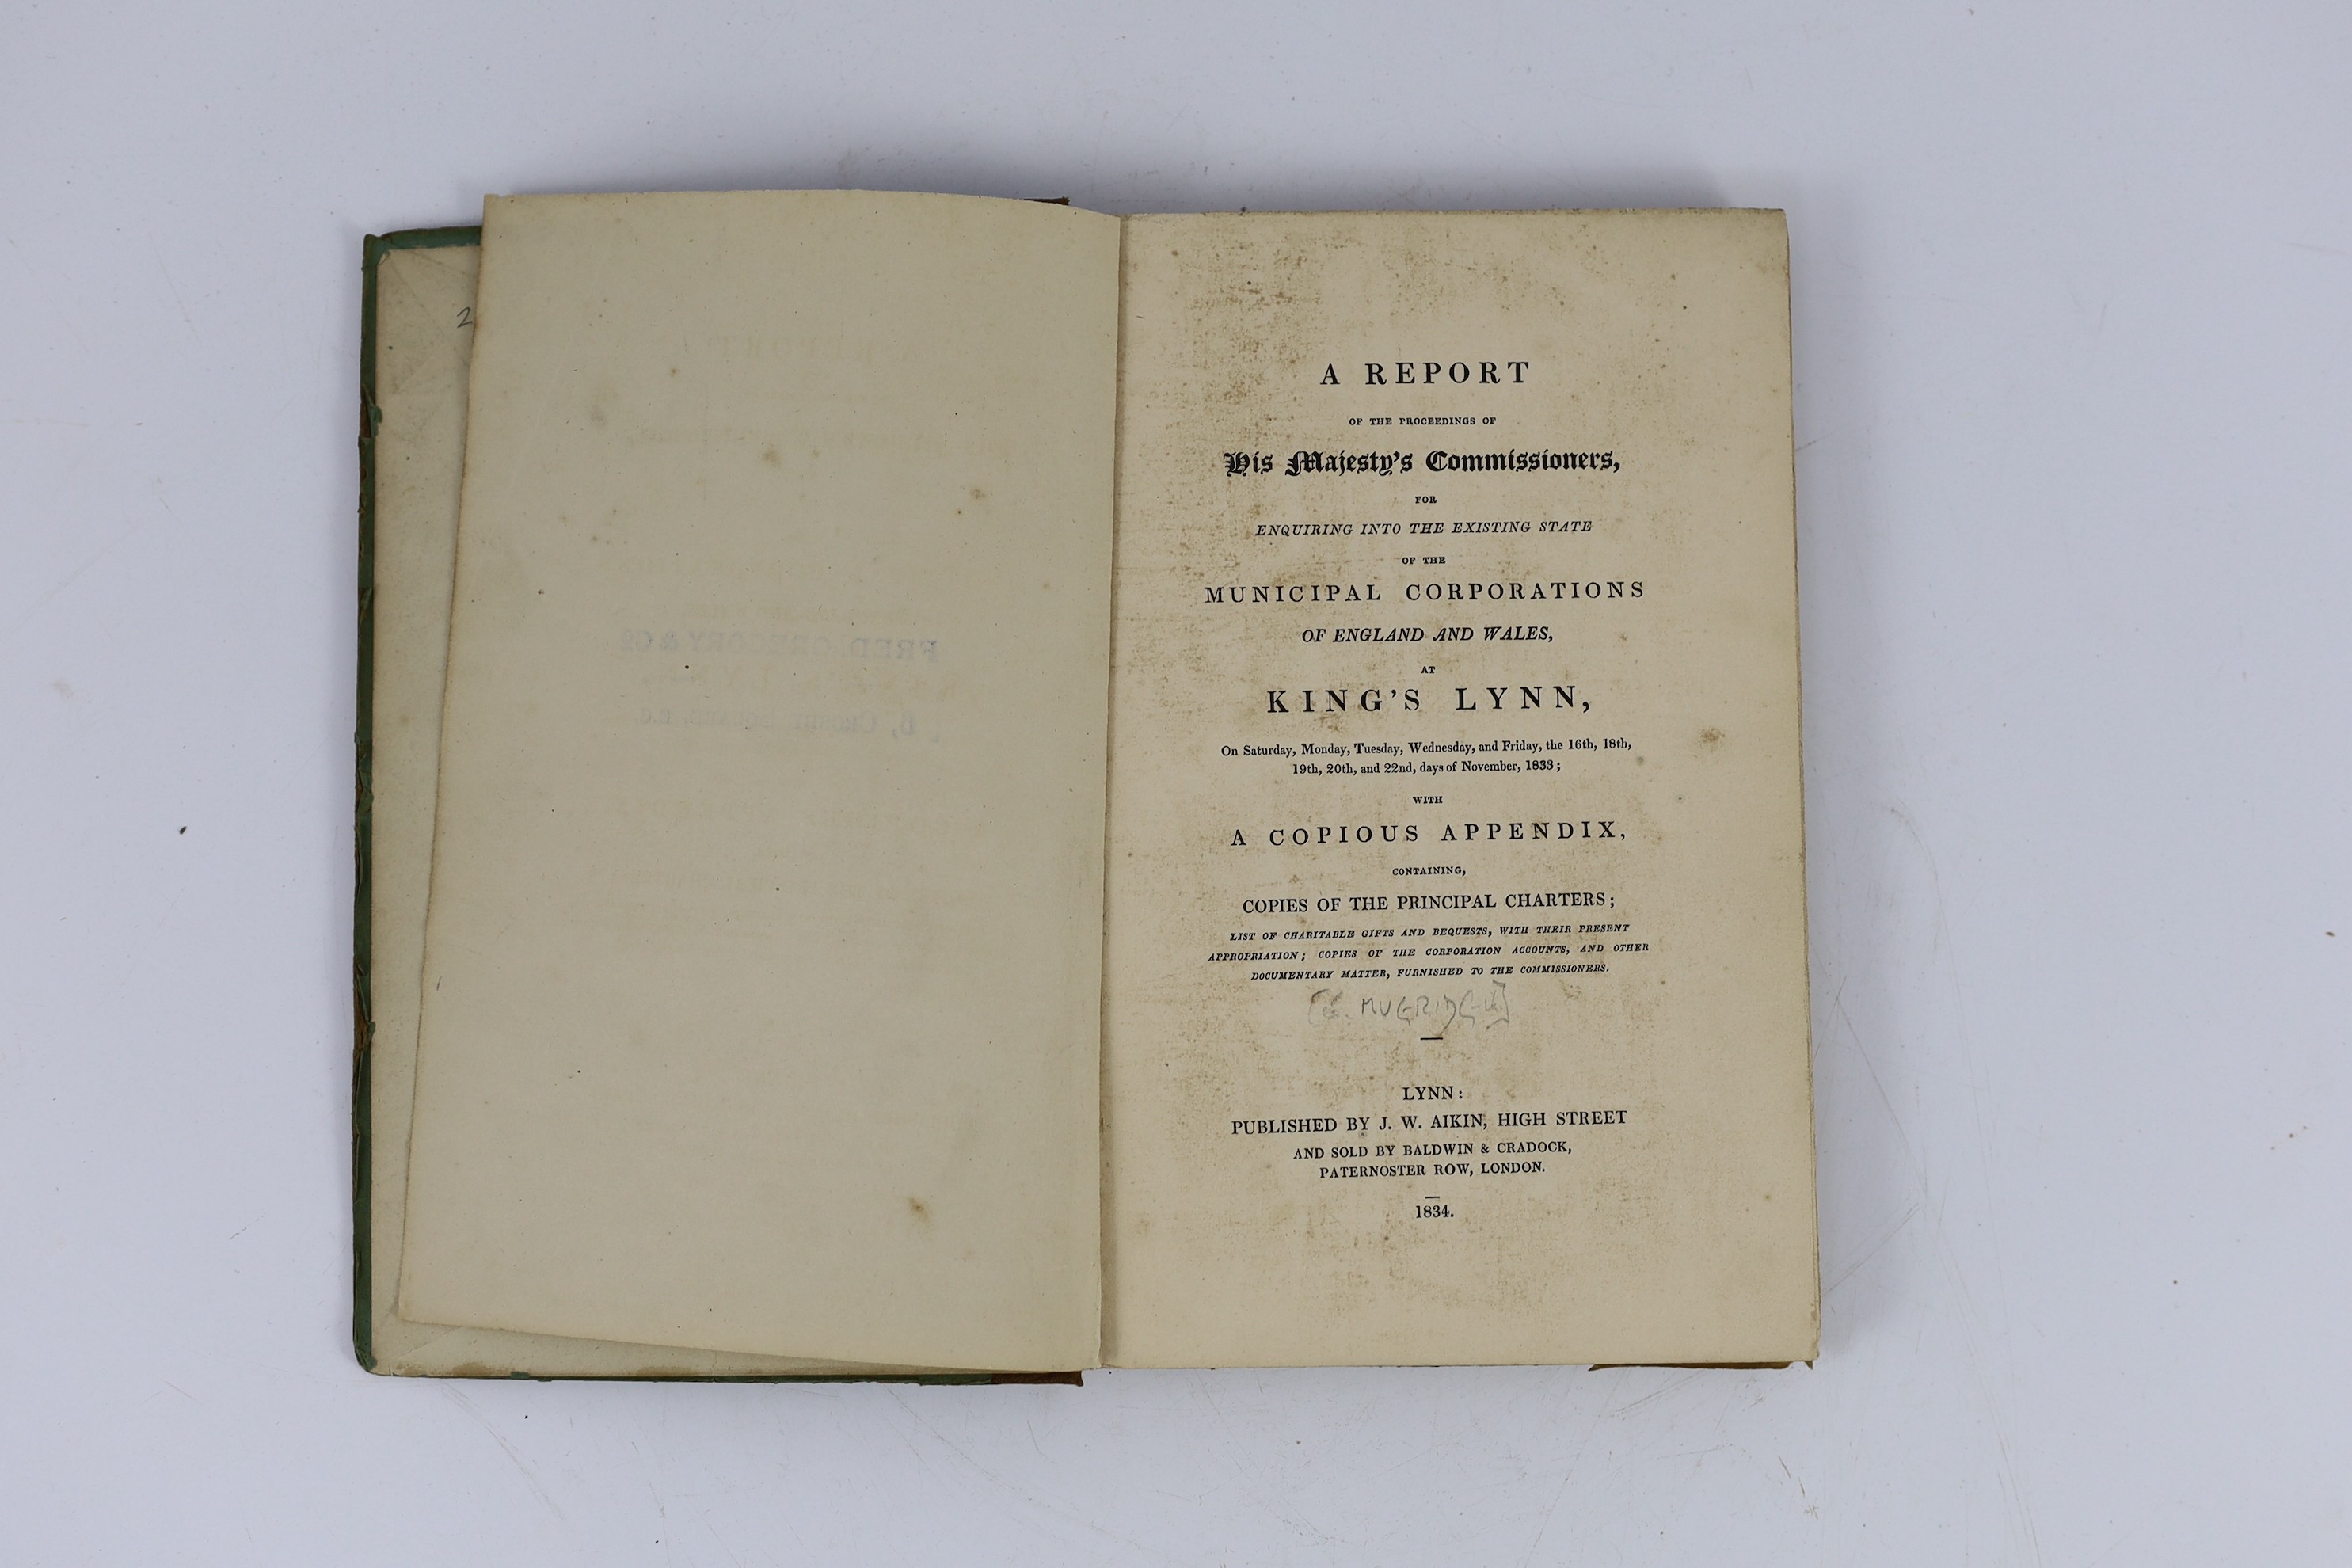 NORFOLK: Clark, Zachary - An Account of the Different Charities belonging to the Poor of the County of Norfolk....original paper boards with printed label, uncut. Bury St. Edmund's, 1811; A Report of the Proceedings of H